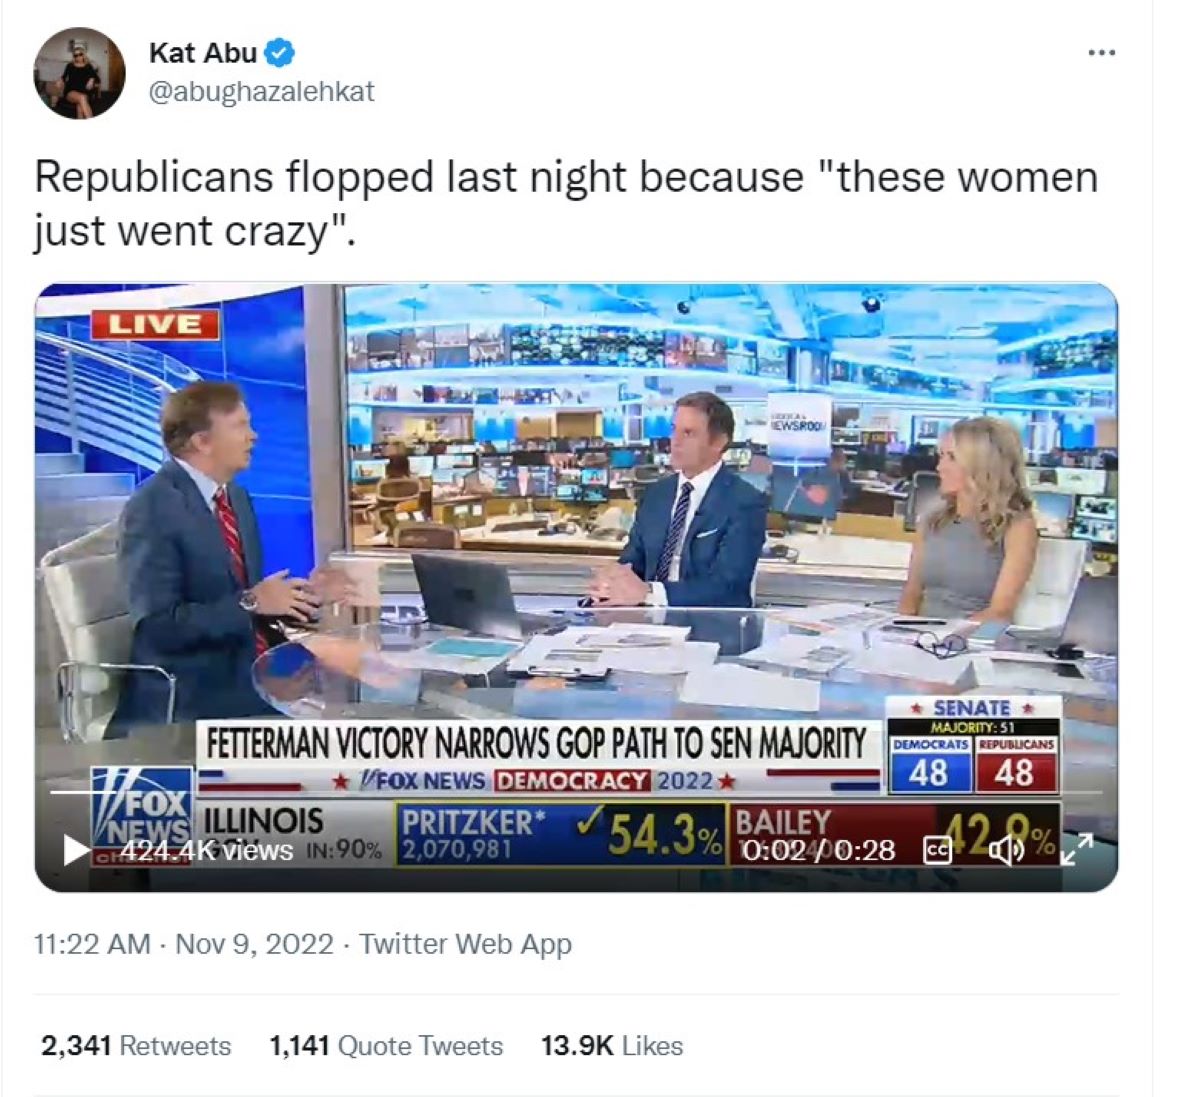 Screenshot of a tweet by Kat Abu reading "republicans flopped last night because 'these women just went crazy'"